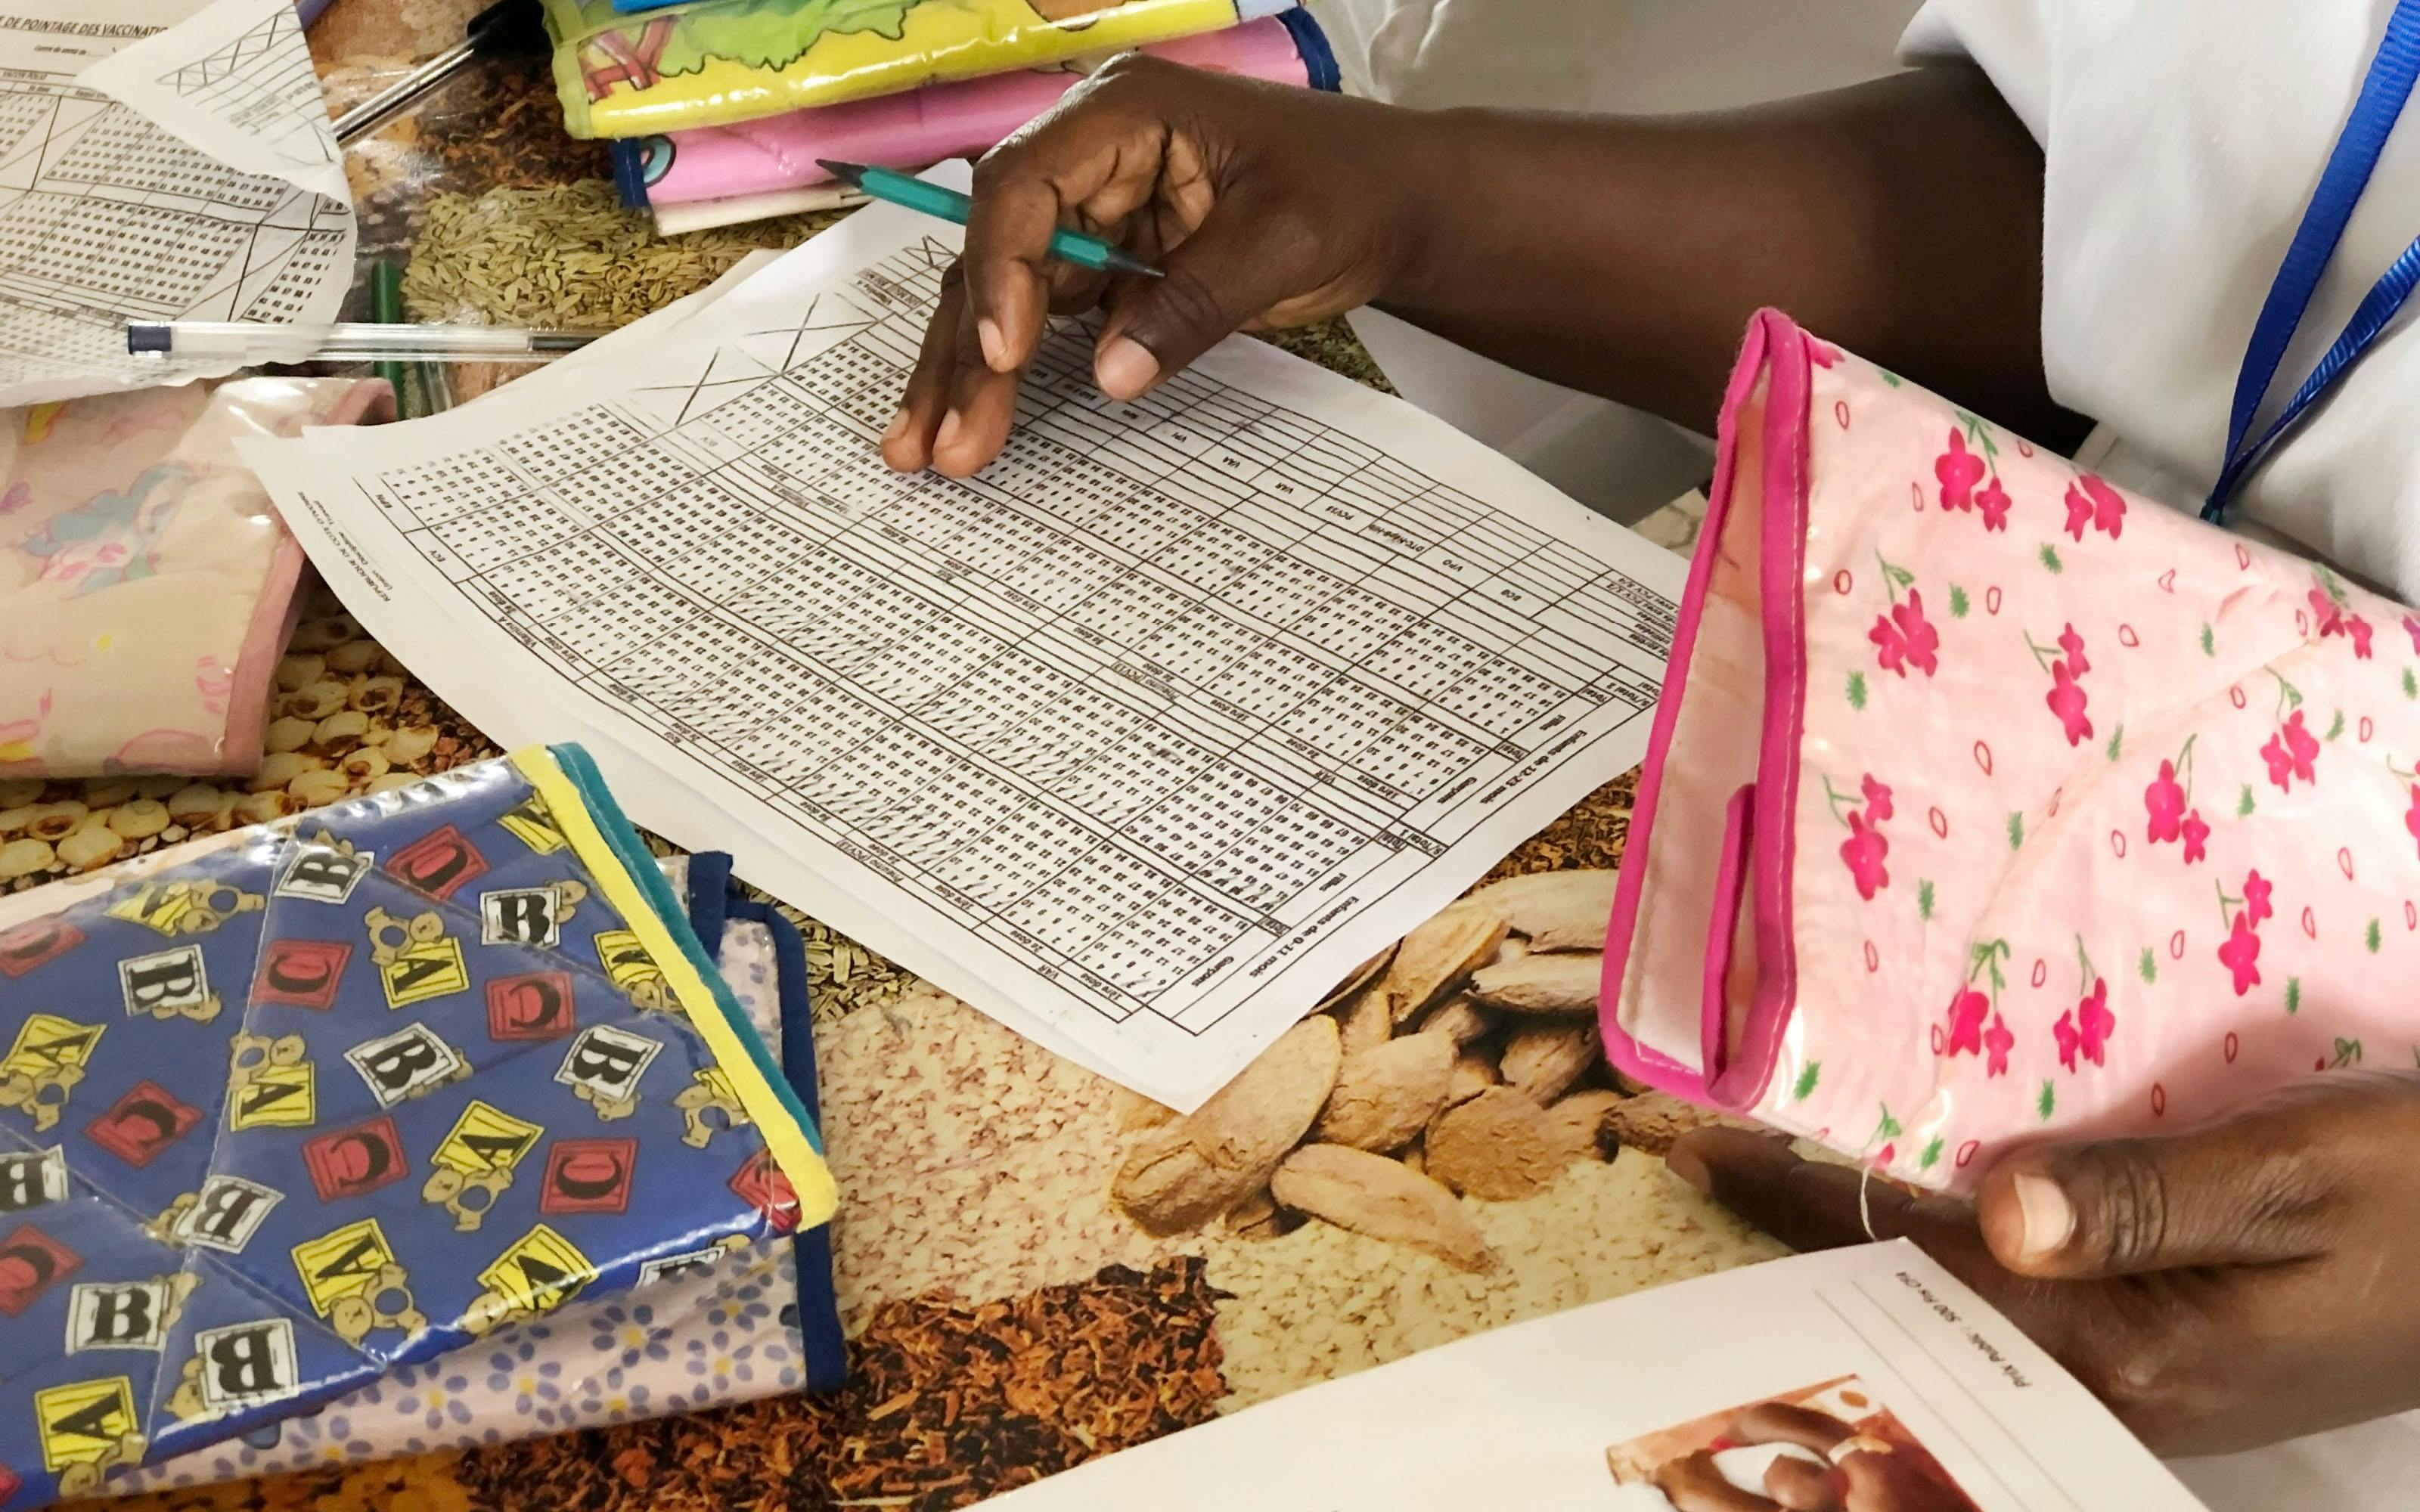 
Help to support the decision-making process and enrich the patient communication of public health workers in Nigeria, Ivory Coast and Mozambique through better designed paper-based information systems.